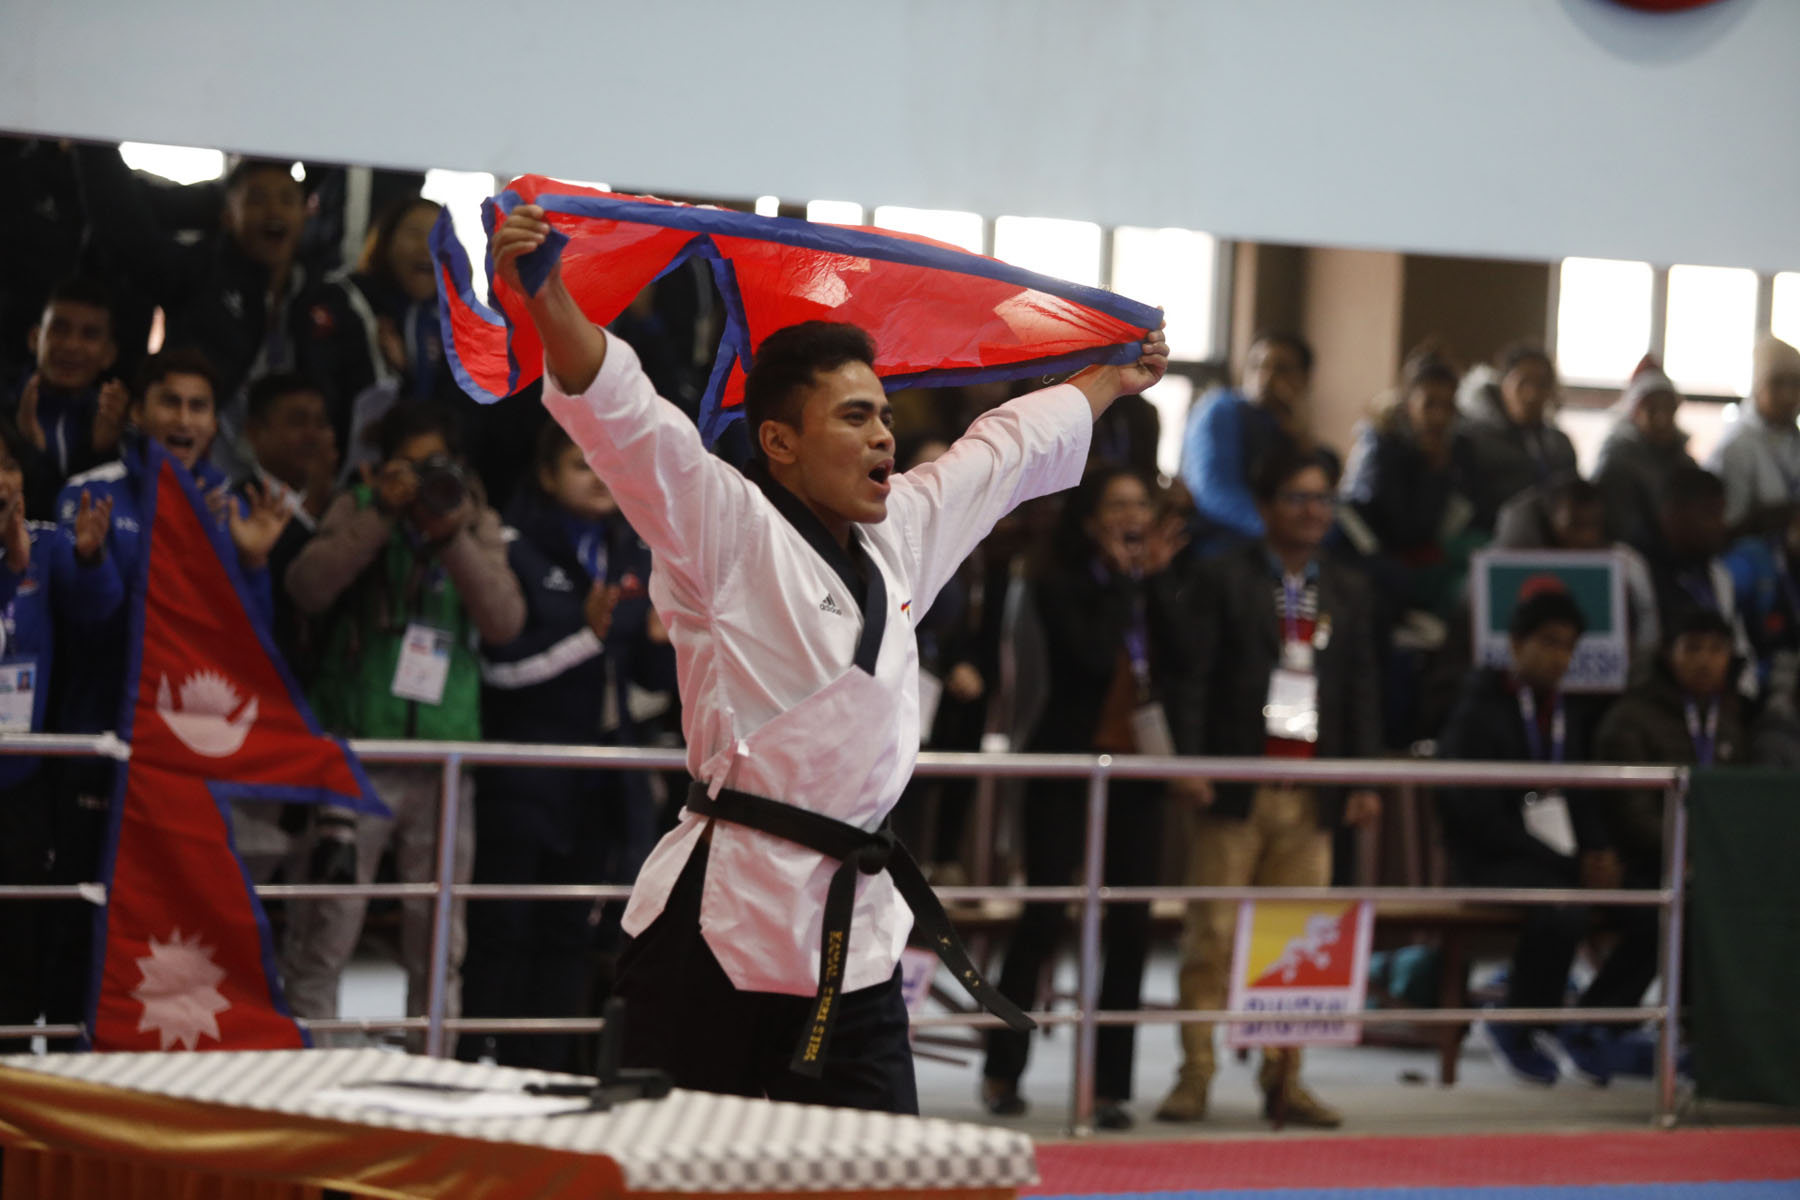 SAG 2019: List of medal winners for Nepal (updated)